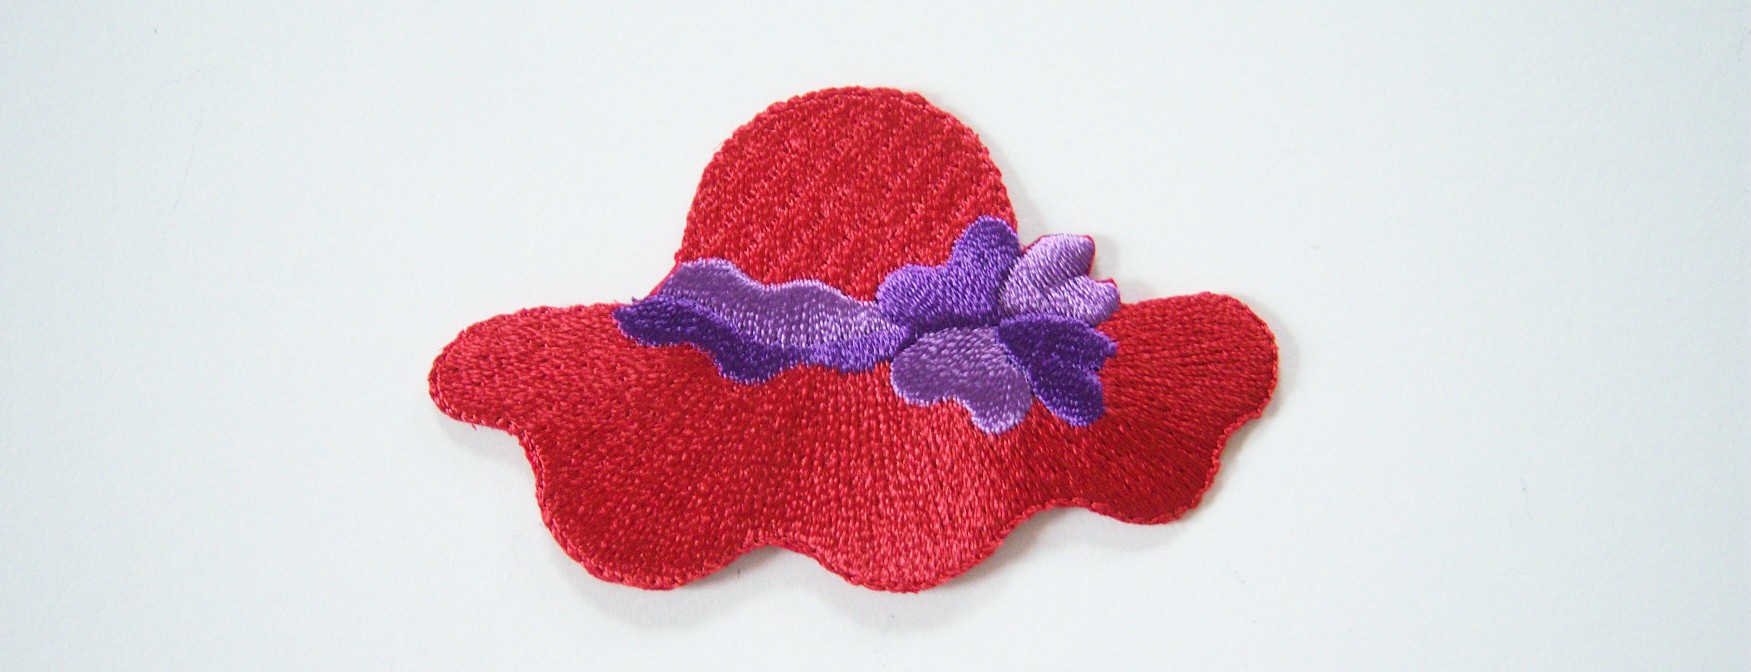 Wrights Red/Purple Hat Applique